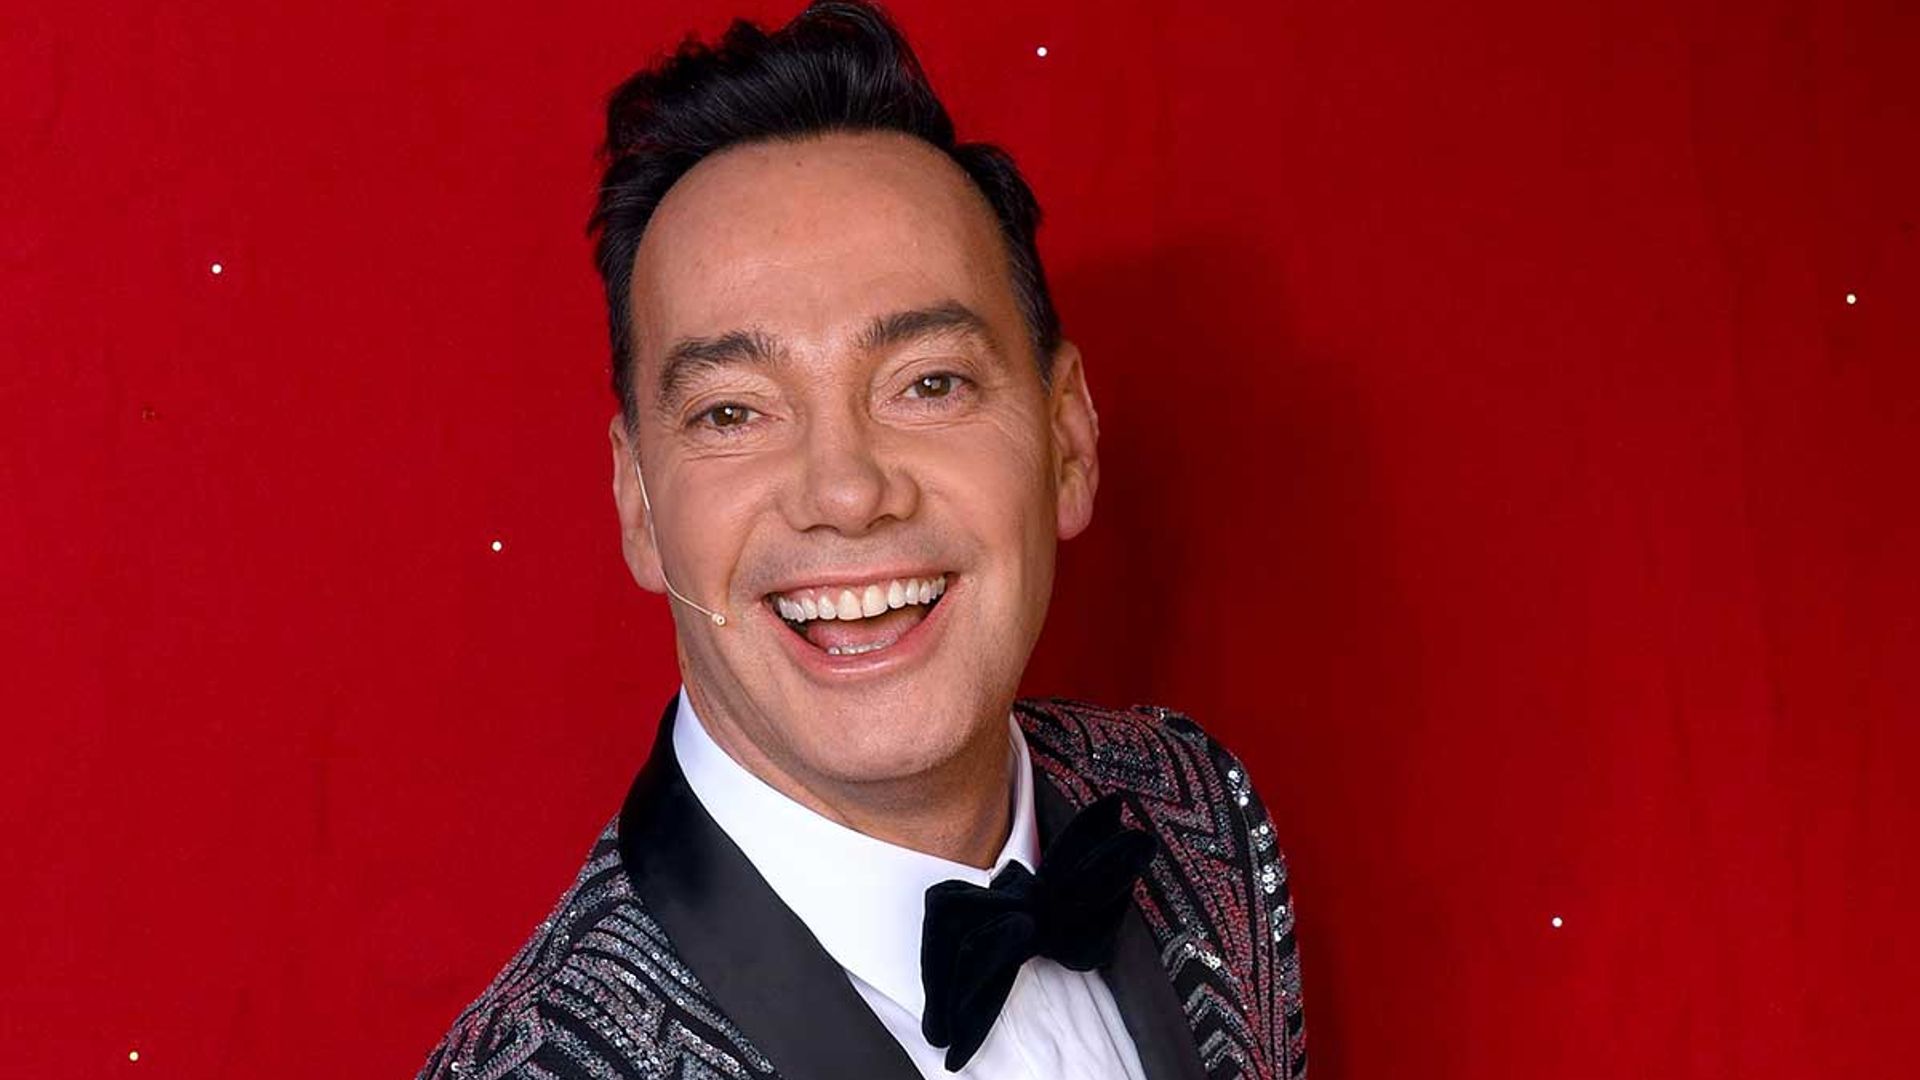 What is Strictly Come Dancing judge Craig Revel Horwood's net worth?